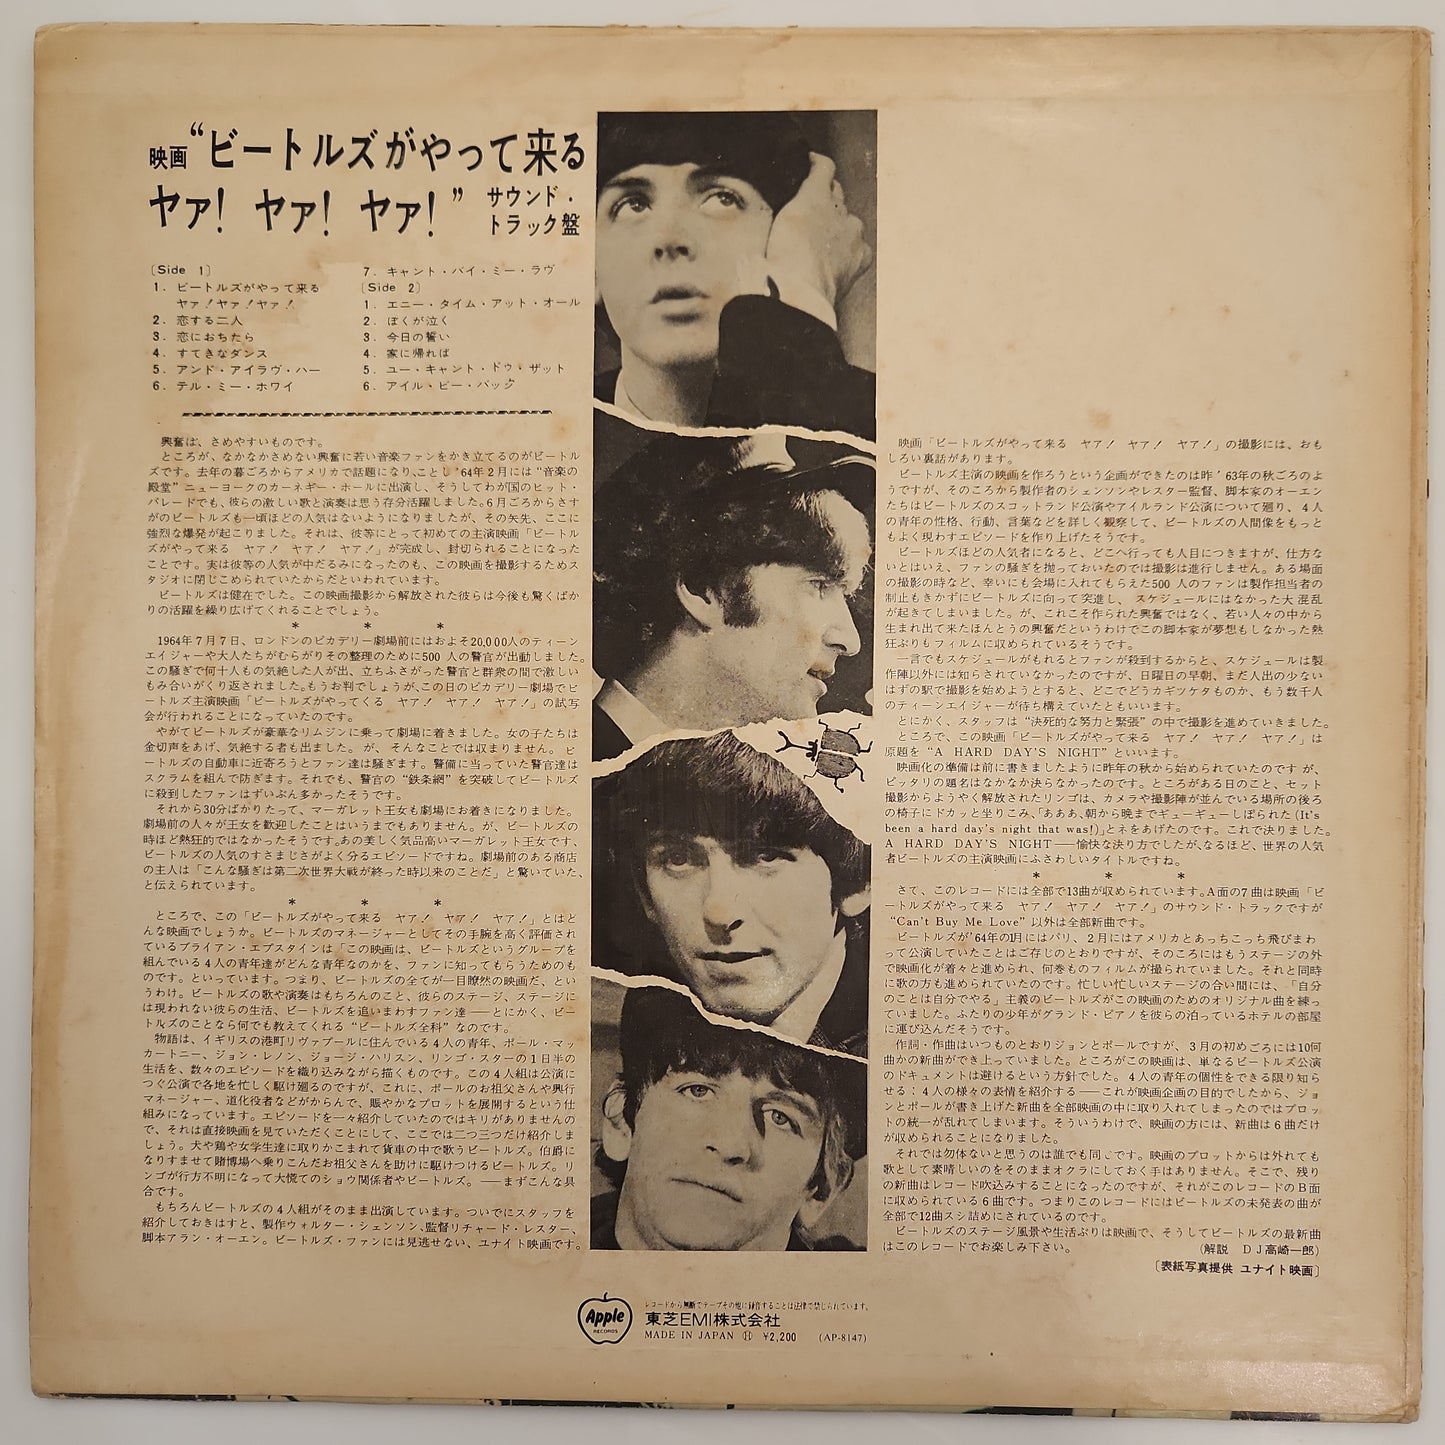 The Beatles - A Hard Day's Night (F42)